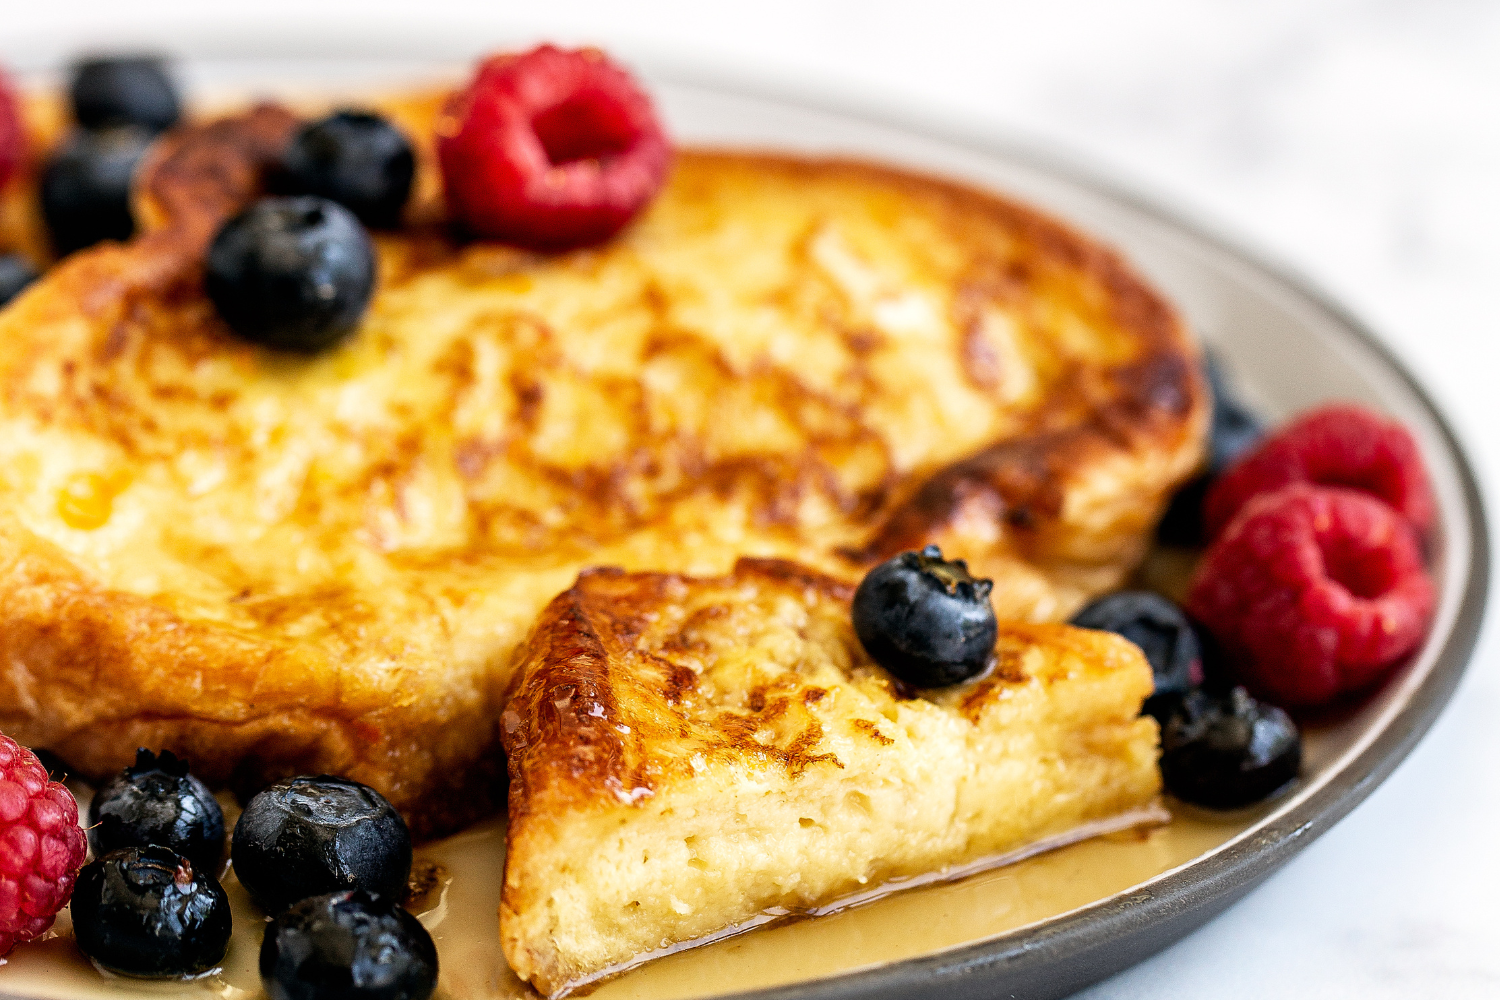 slices of golden brown French Toast, with some maple syrup and fresh berries, on a plate ready to serve